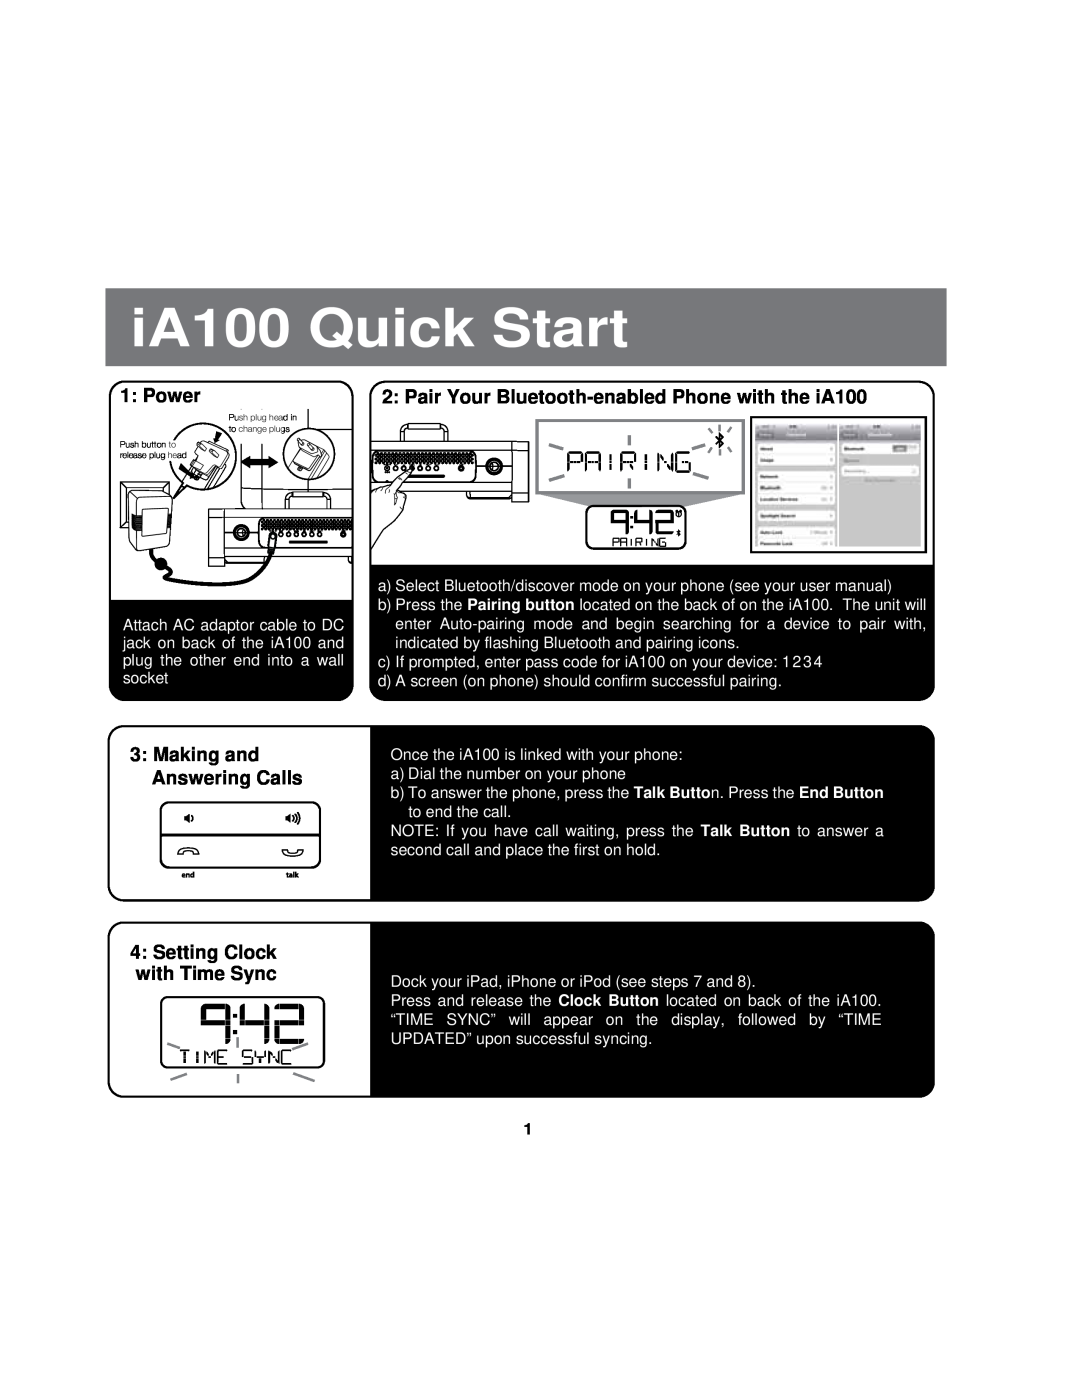 iHome manual iA100 Quick Start, Power, Making and Answering Calls, Setting Clock with Time Sync 